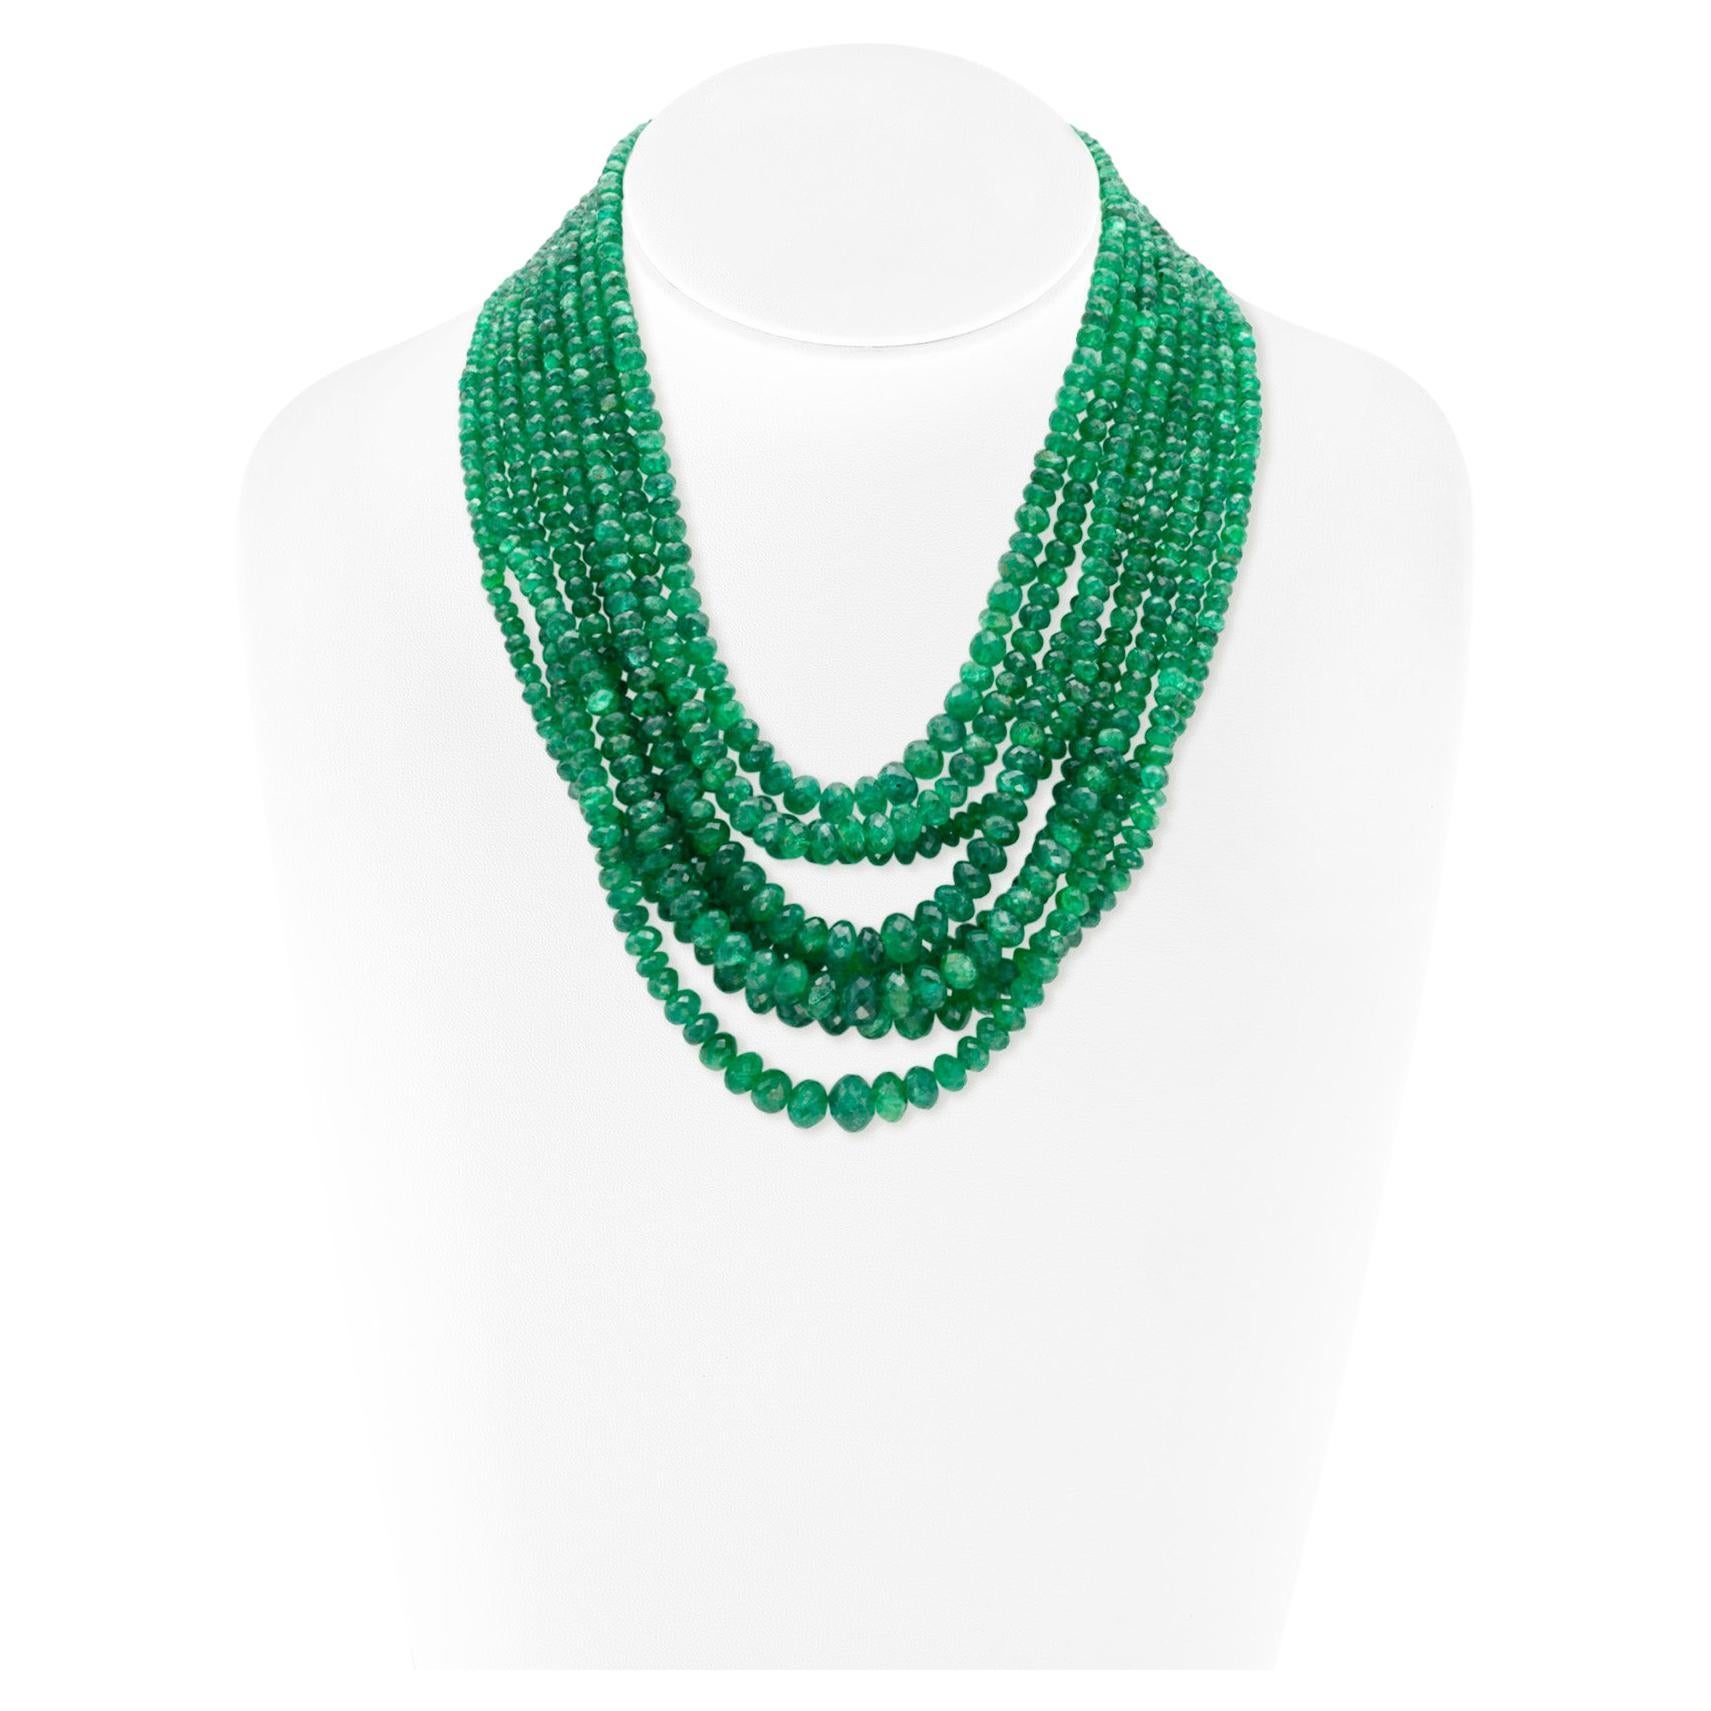 850.00 Carat Emerald Beads Necklace For Sale